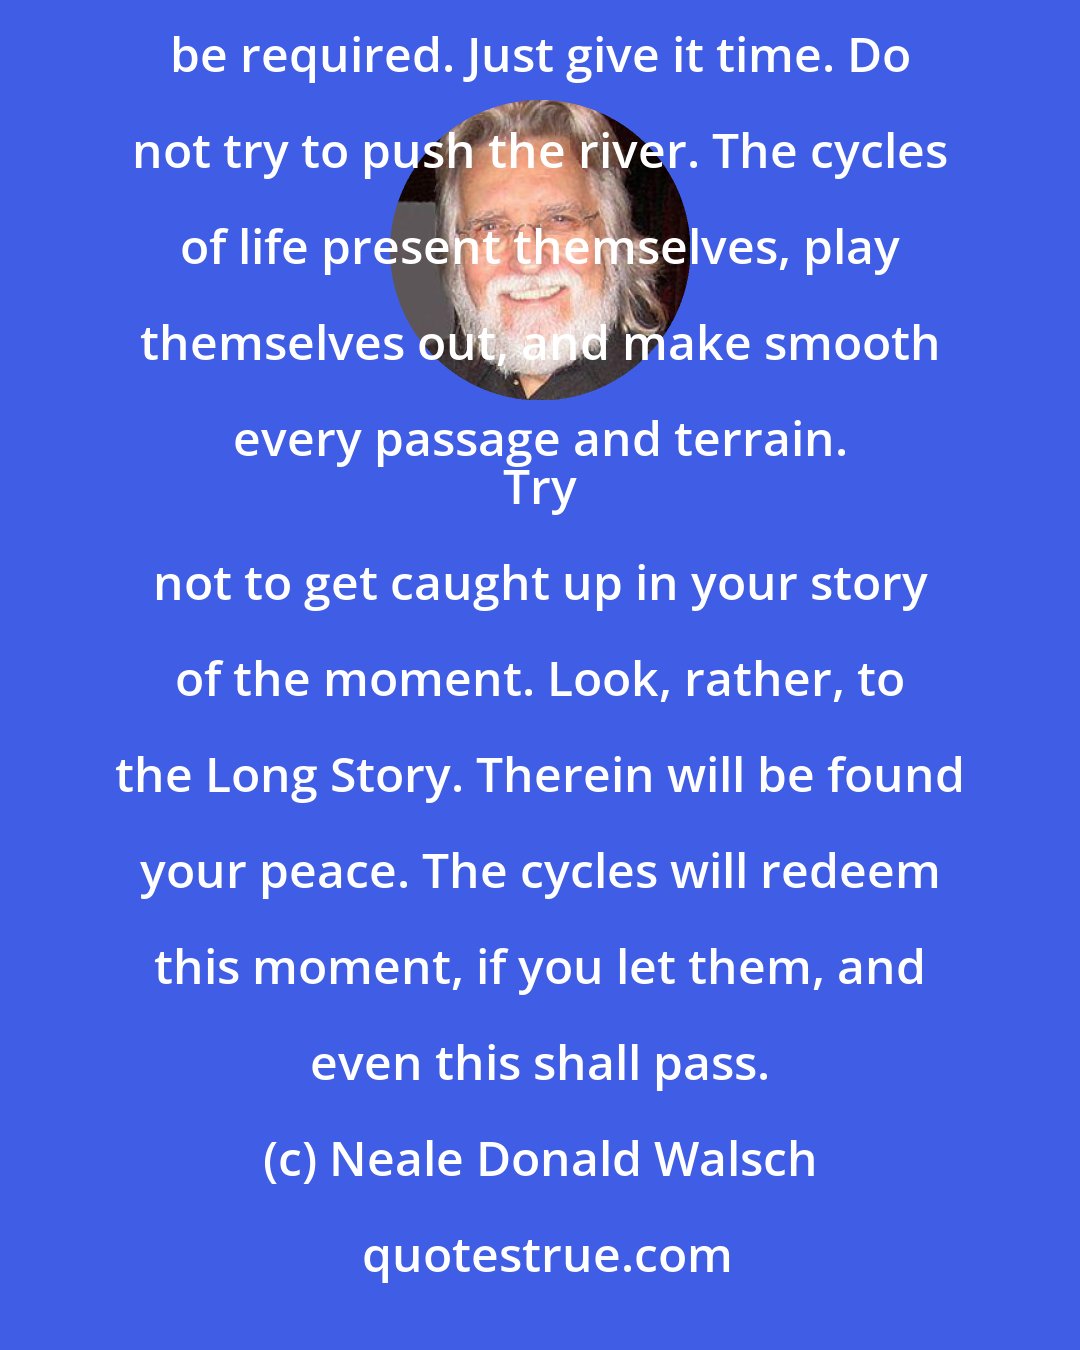 Neale Donald Walsch: Morning comes every day; the sunrise does not fail, nor the sunset. 
 Give it time. That is all that may be required. Just give it time. Do not try to push the river. The cycles of life present themselves, play themselves out, and make smooth every passage and terrain. 
 Try not to get caught up in your story of the moment. Look, rather, to the Long Story. Therein will be found your peace. The cycles will redeem this moment, if you let them, and even this shall pass.